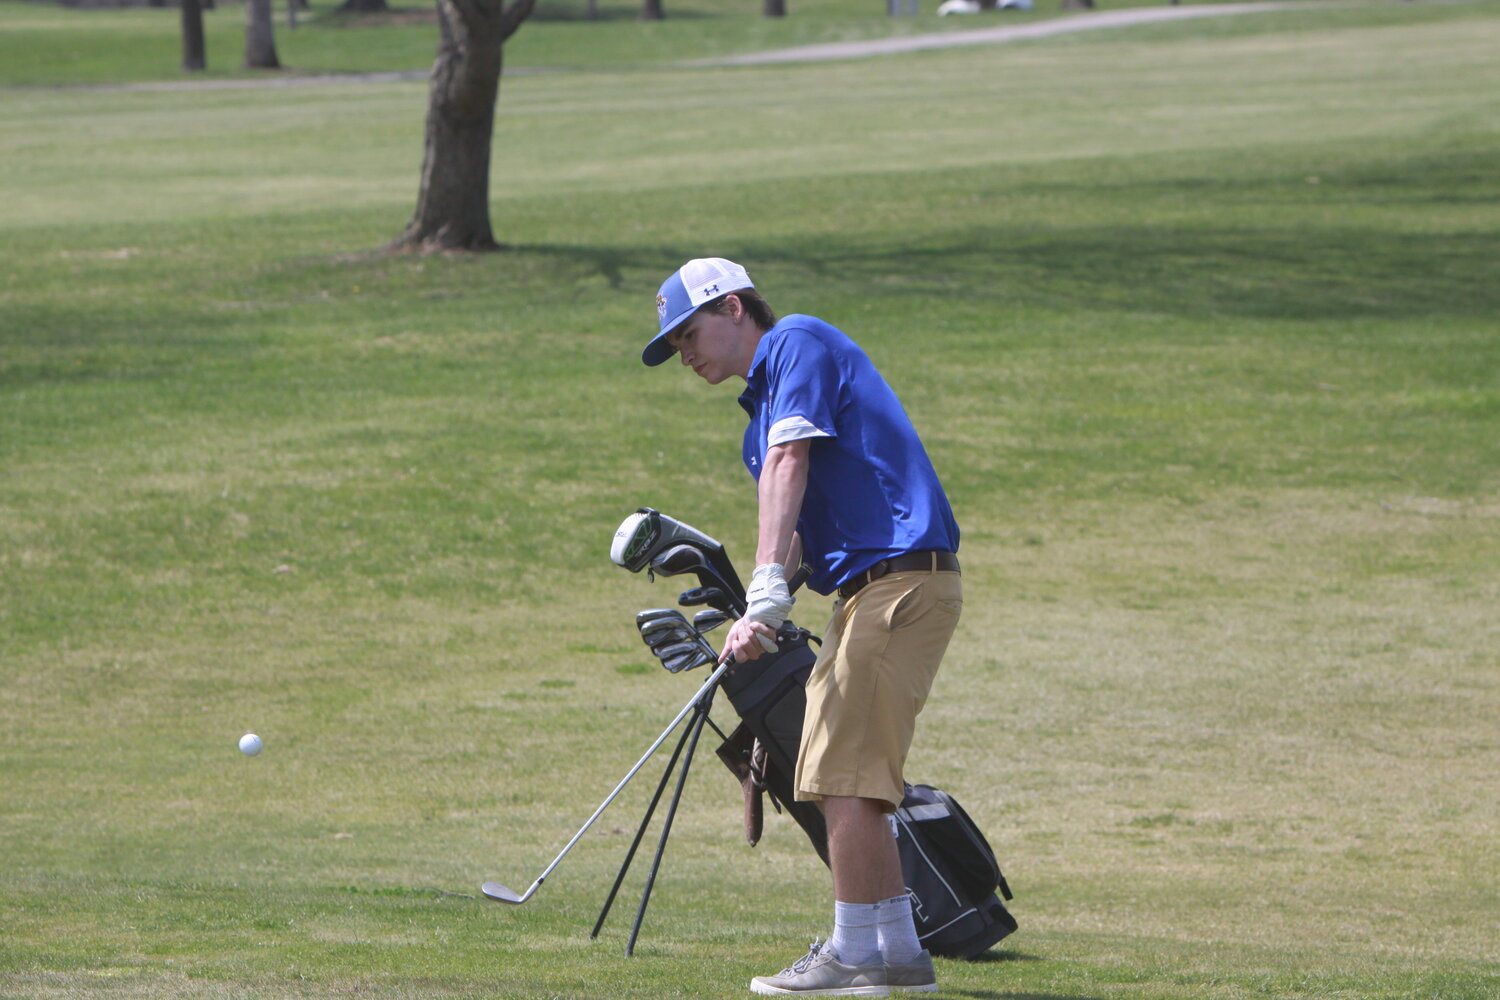 Wright City’s Aiden O’Donnell makes a chip shot at the No. 3 hole at the Warrenton Invitational on April 14 at Country Lake Golf Club.